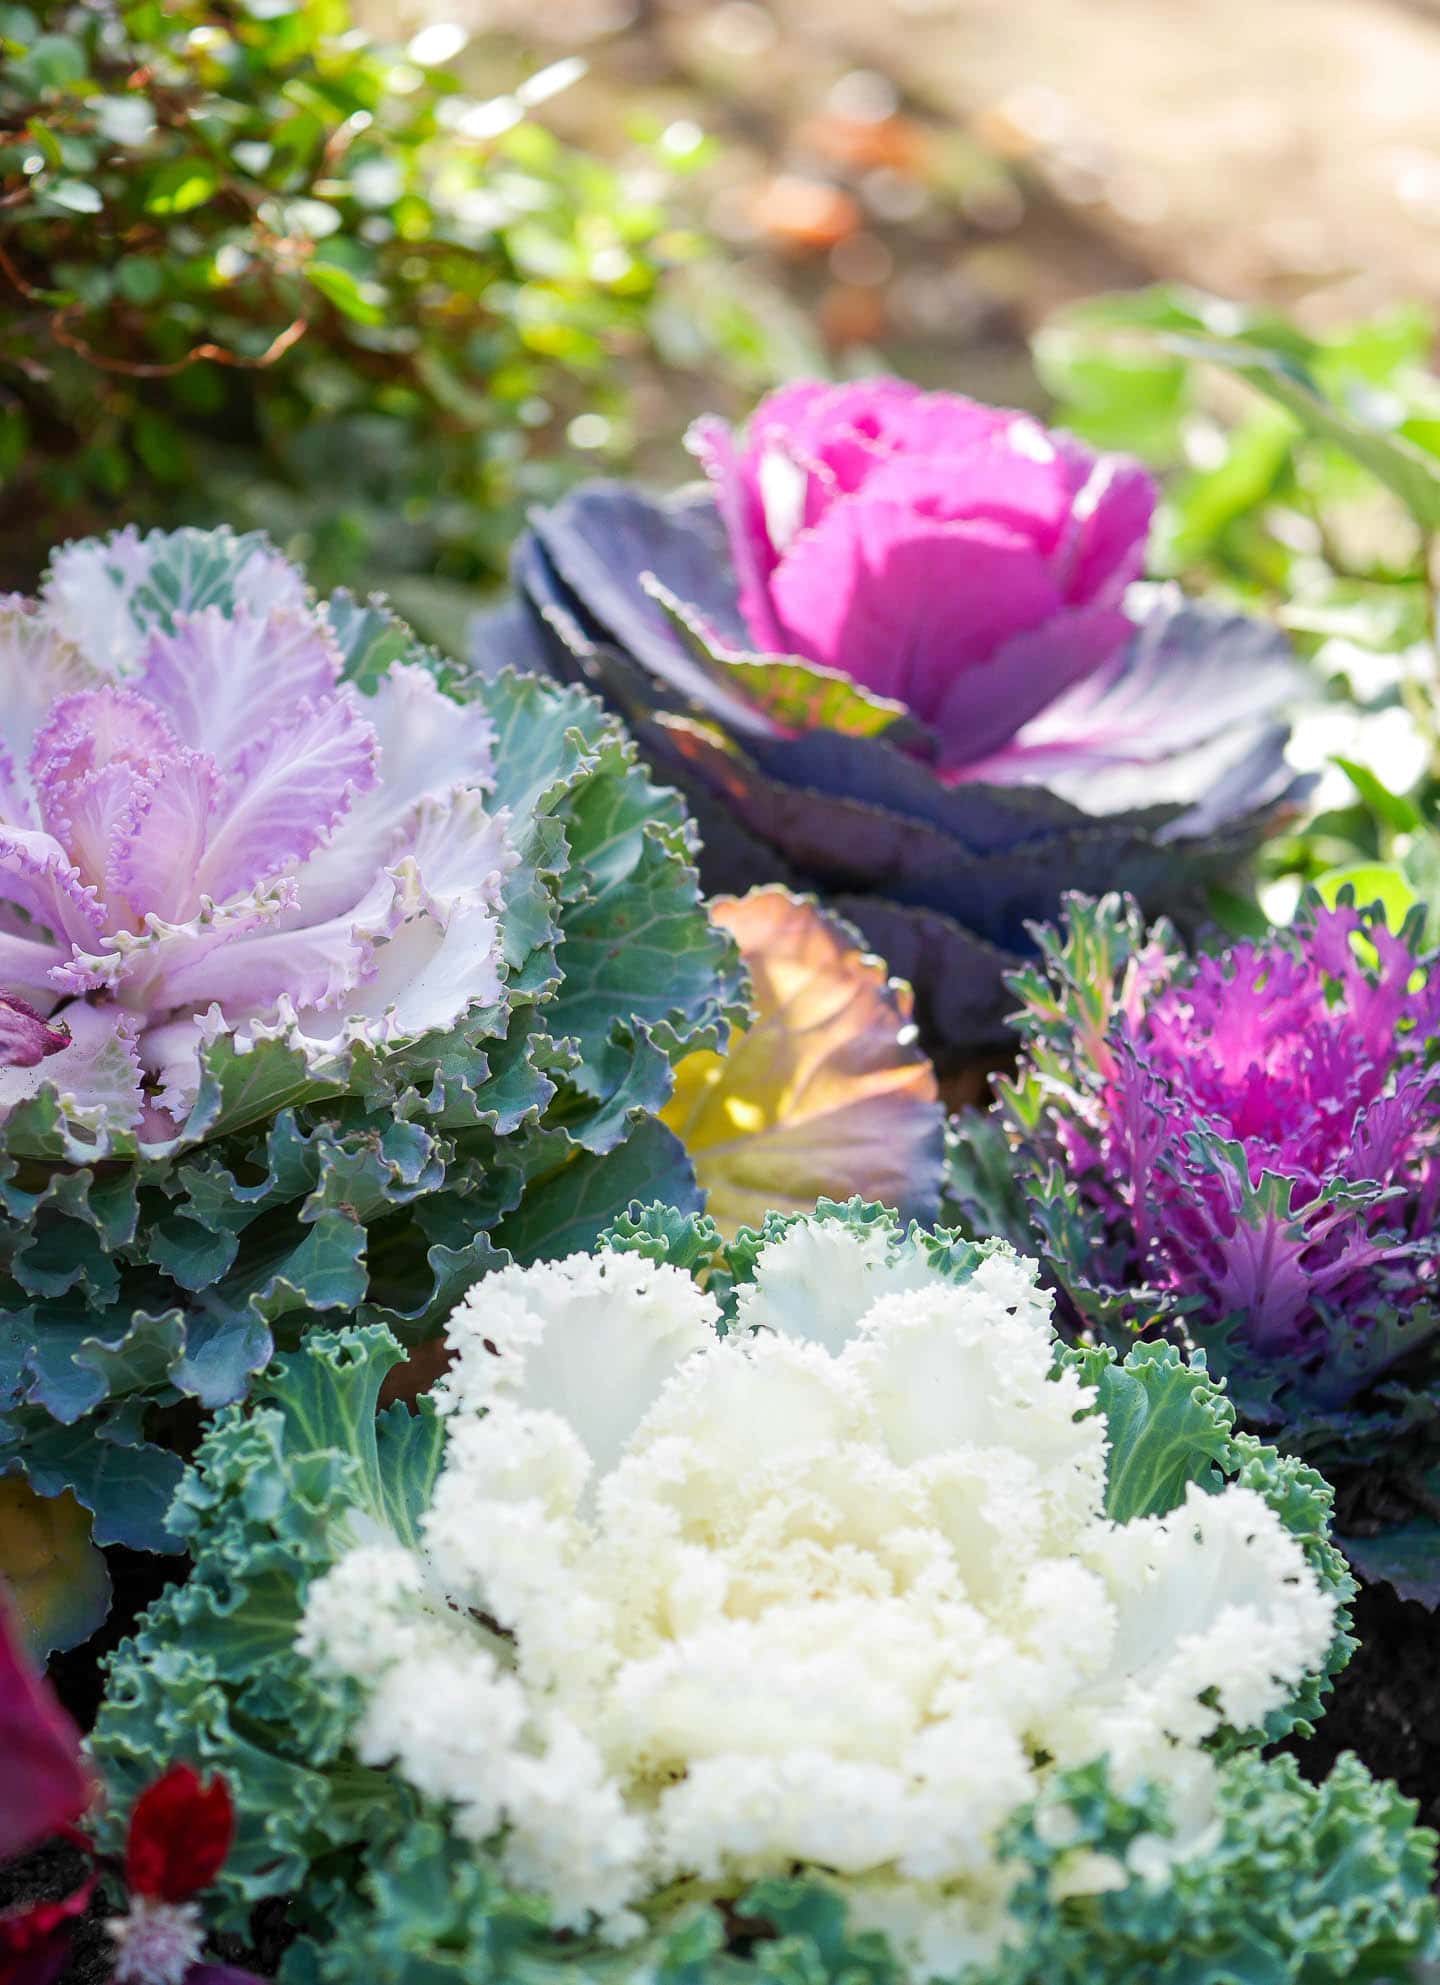 A group of 4 pink, white, purple and green ornamental kale plants